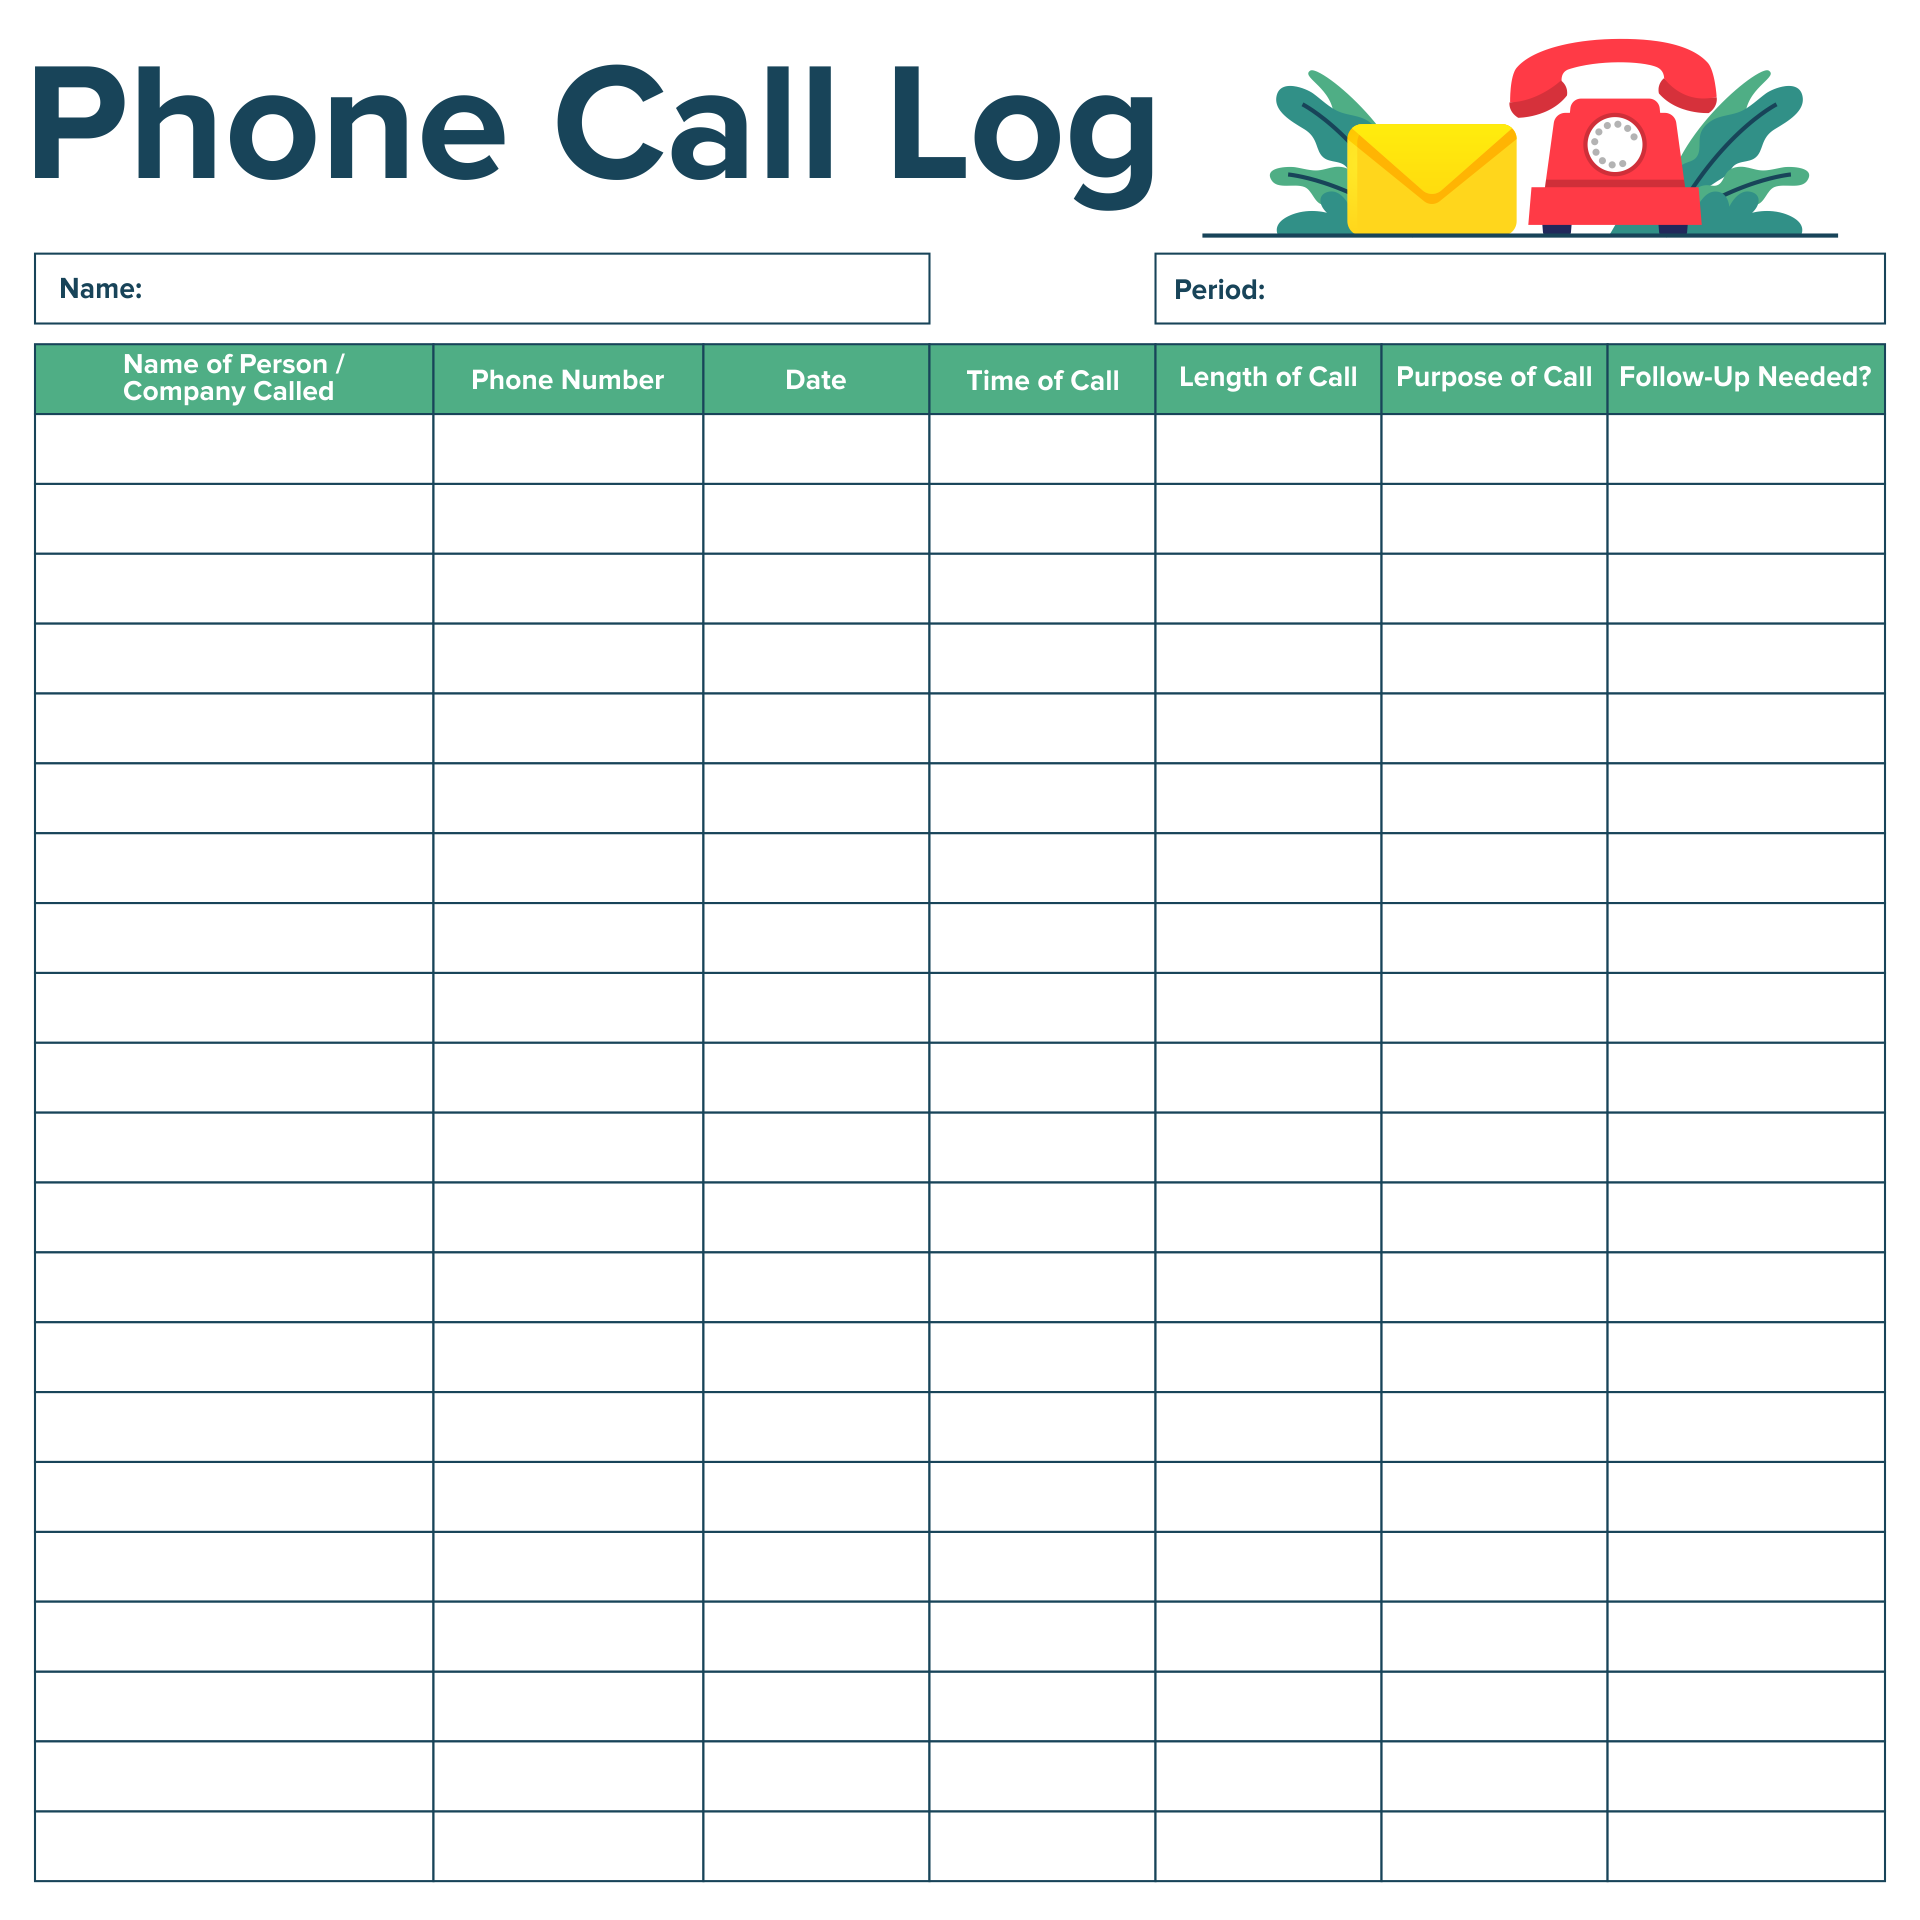 Phone Call Log Template Excel